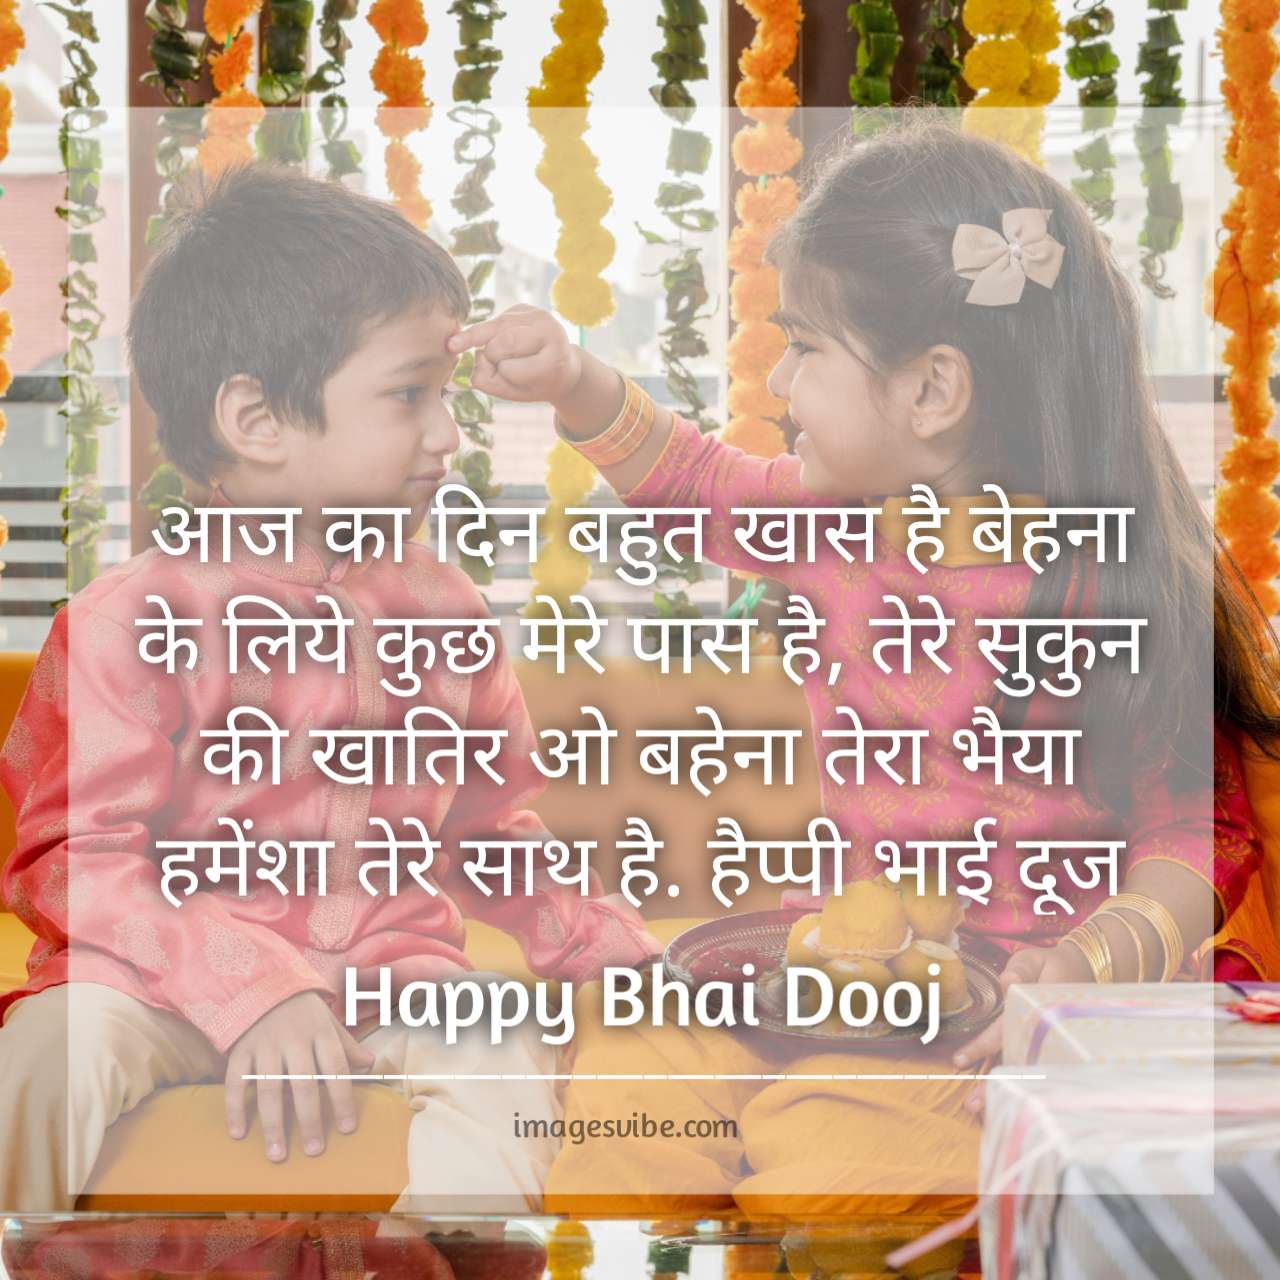 Best 30+ Happy Bhai Dooj Images With Quotes In Hindi & Wishes in ...